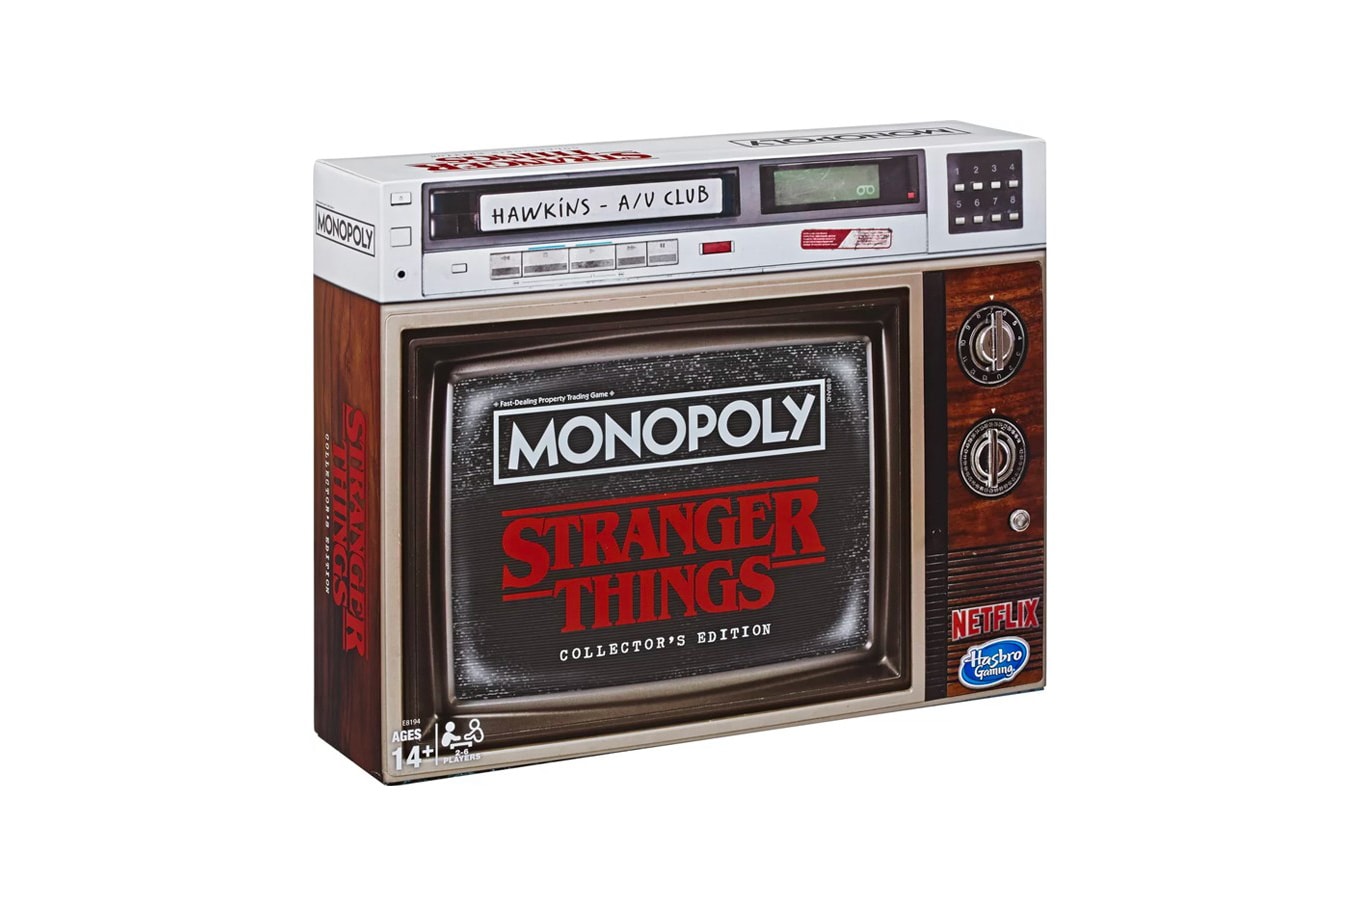 Monopoly Stranger Things Collector's Edition Box